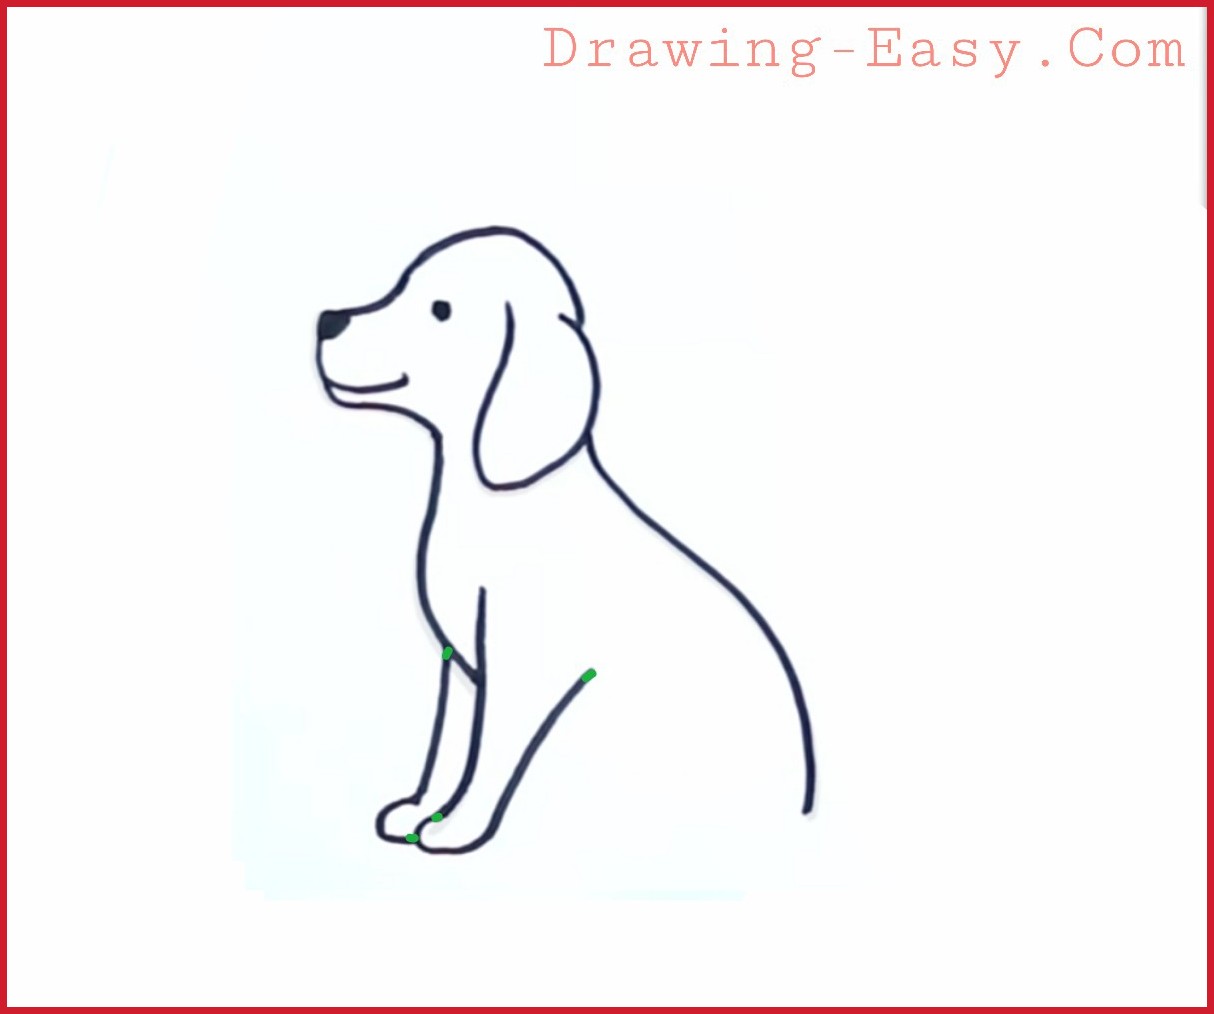 How to Draw a Dog step by step - Drawing Easy